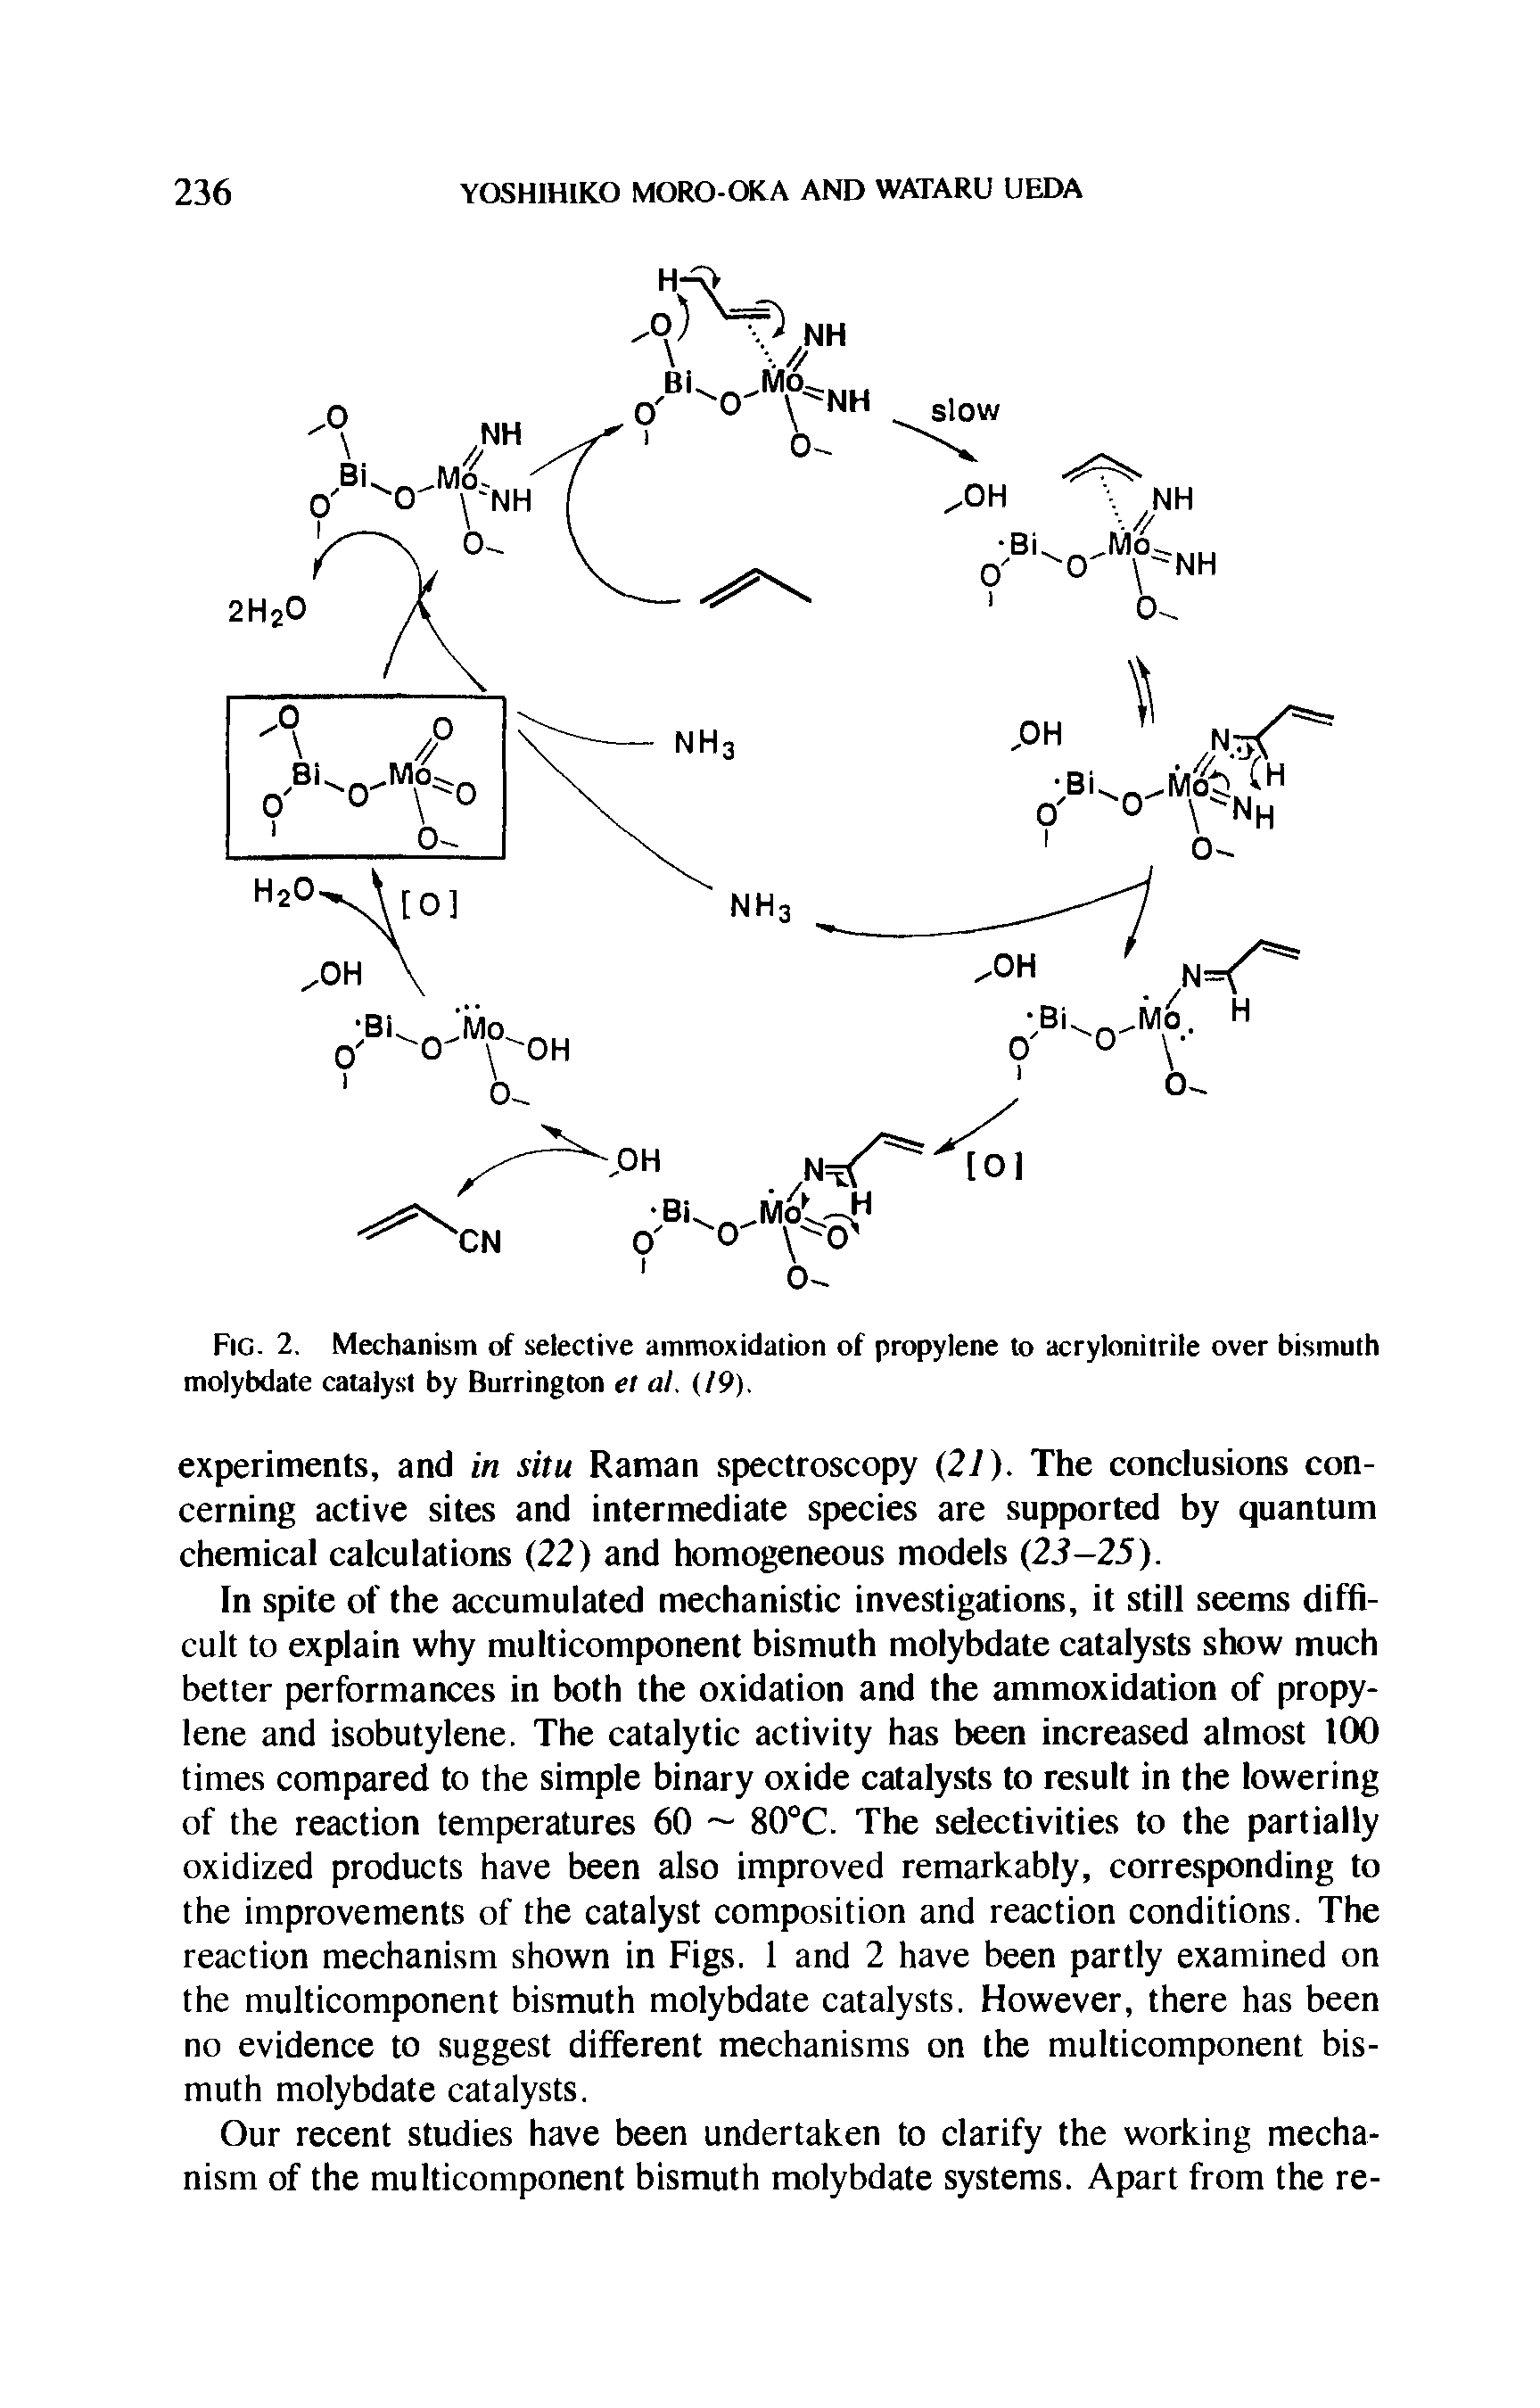 Fig. 2. Mechanism of selective ammoxidation of propylene to acrylonitrile over bismuth molybdate catalyst by Burrington et at. (19).